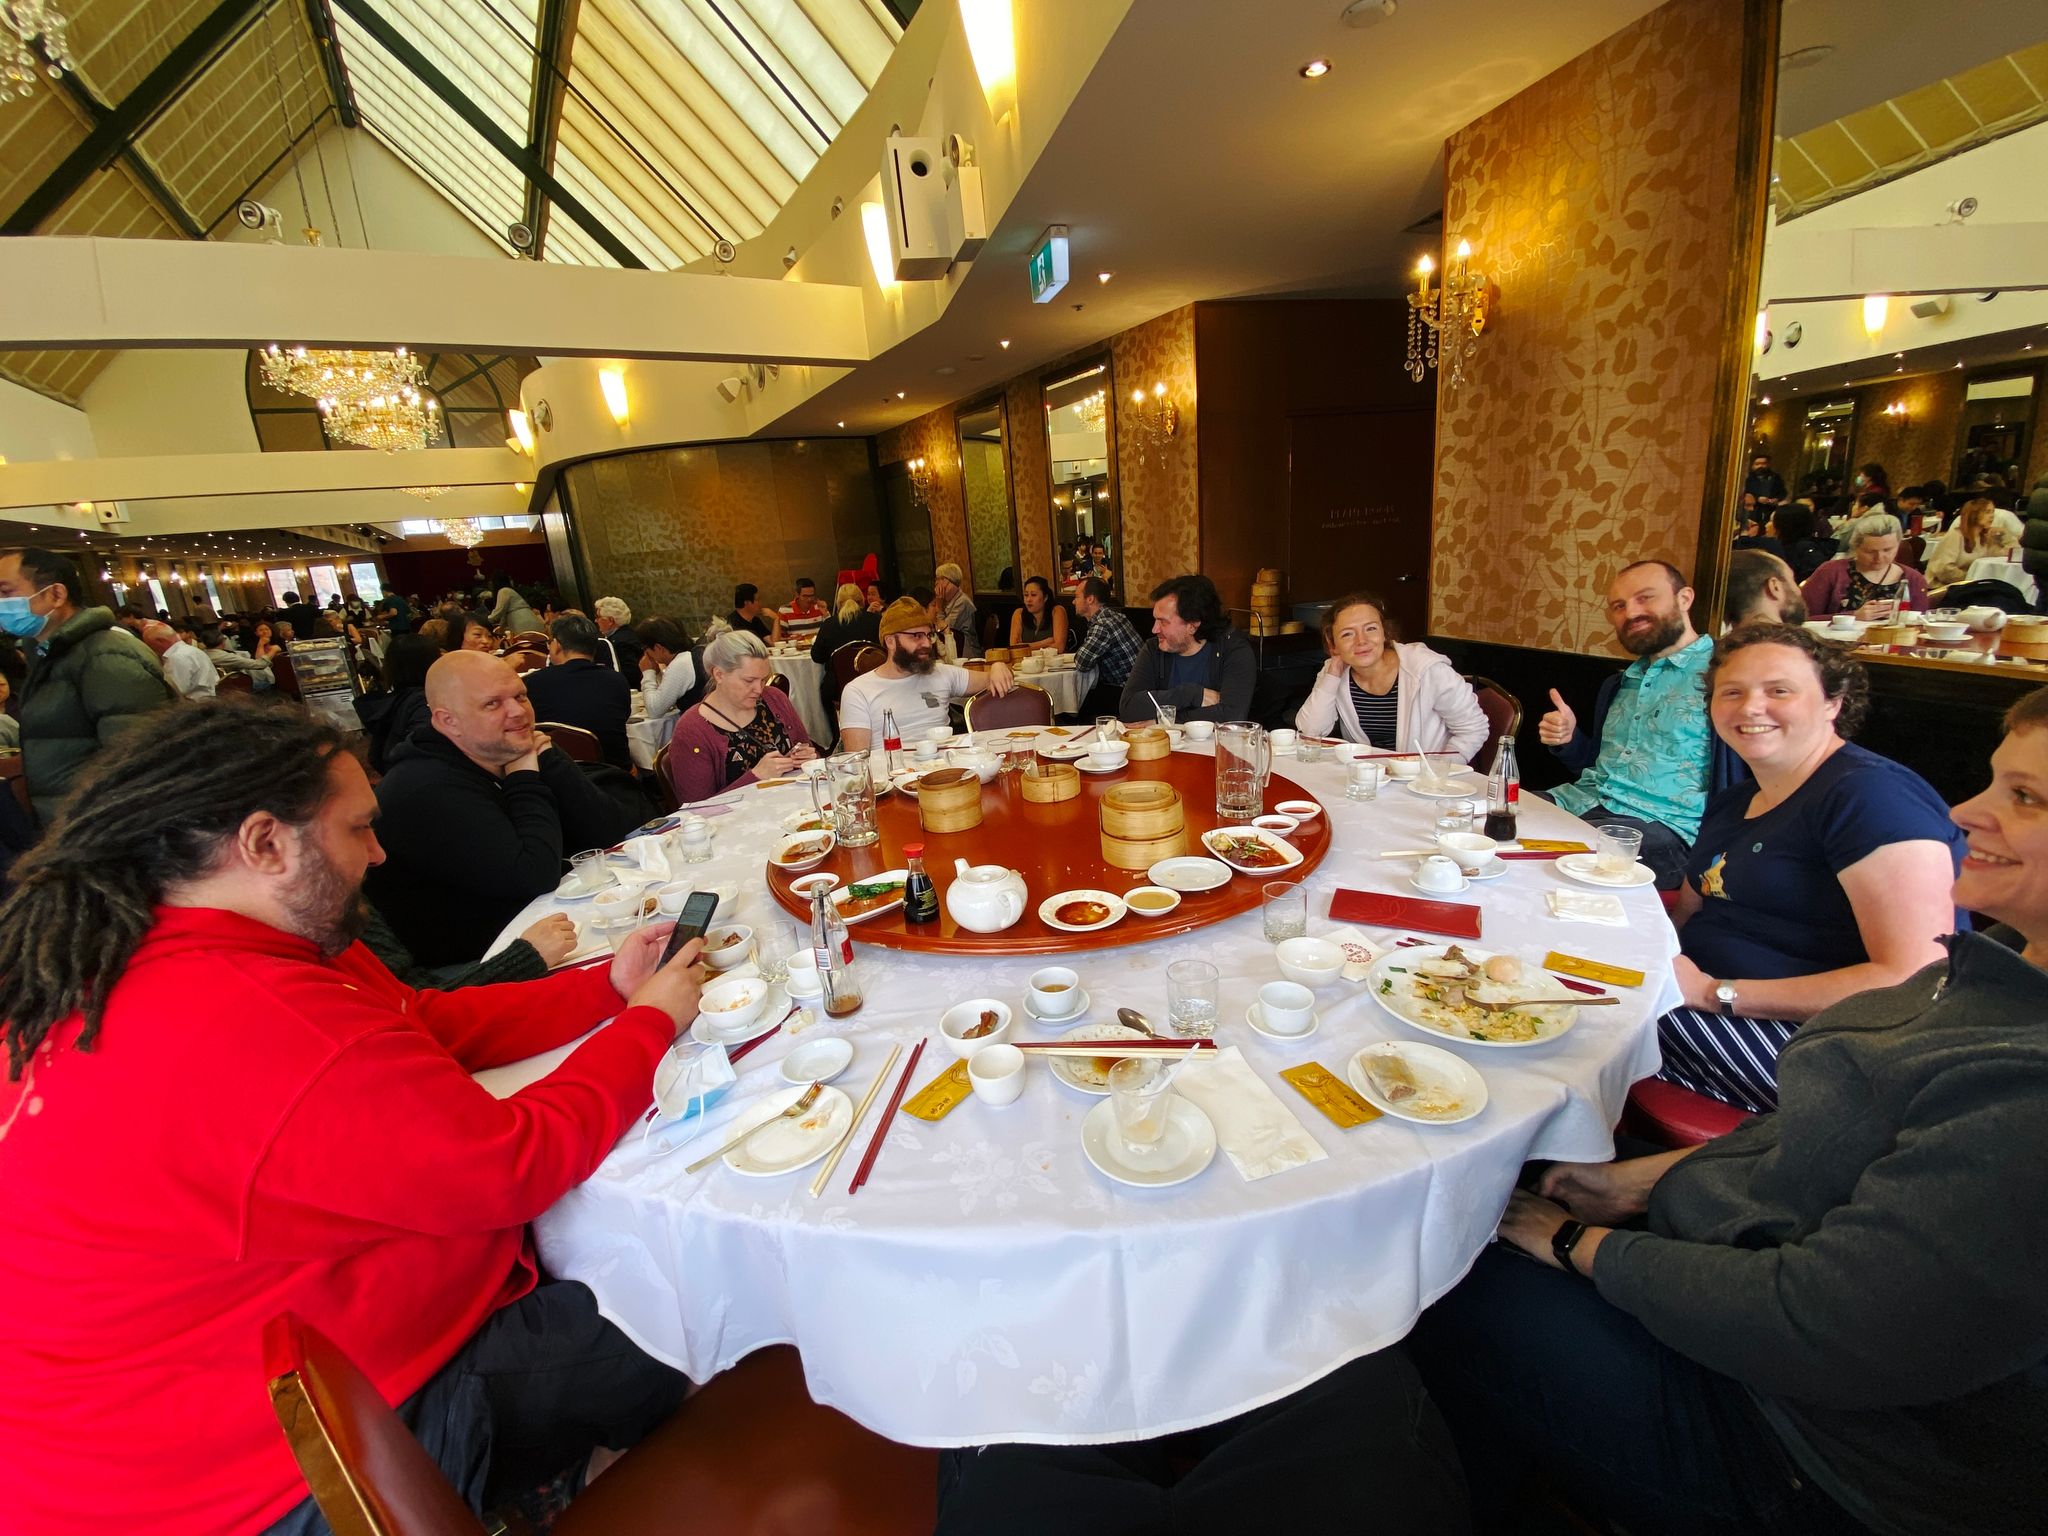 A photo of eleven people sitting around a big round table, with lots of empty plates and steamer baskets in the middle.